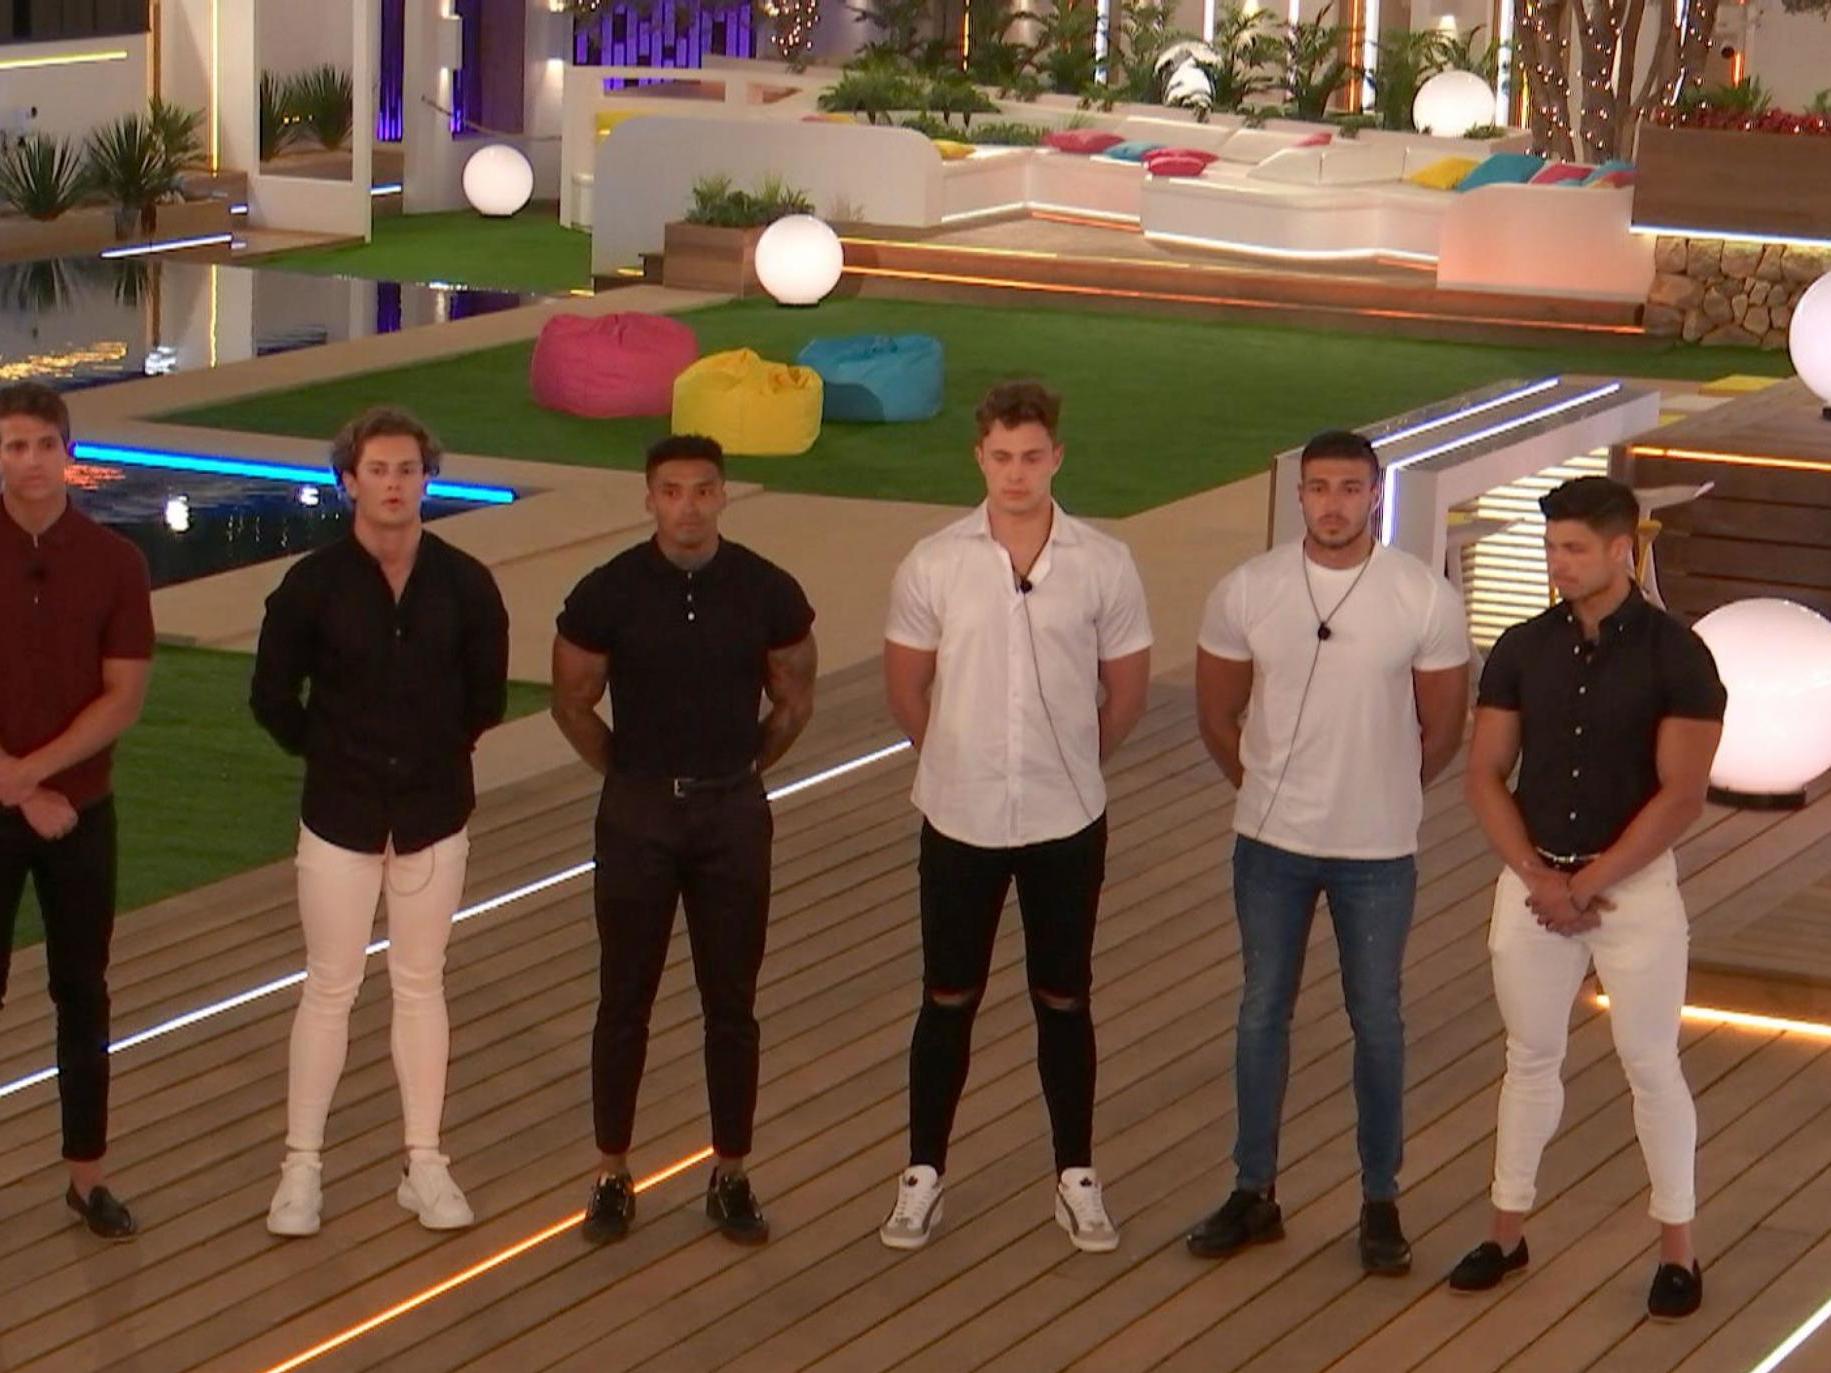 The men on Love Island tend to frequent white skinny jeans.